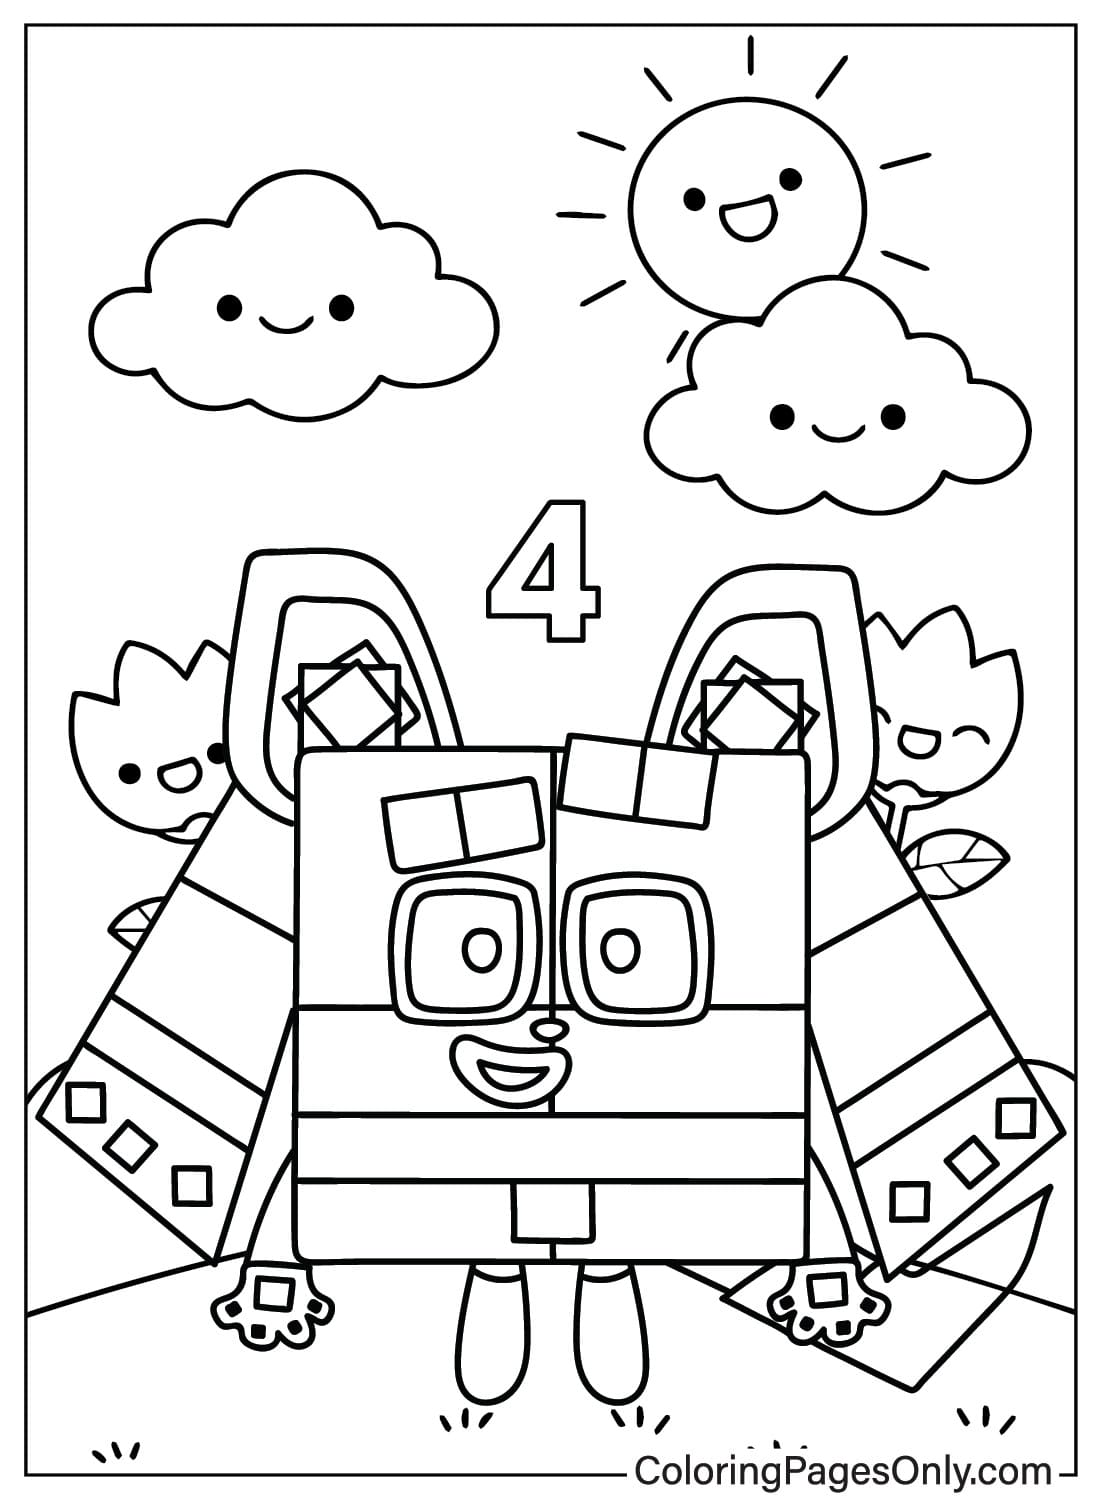 Numberblocks Four Coloring Page Coloring Page